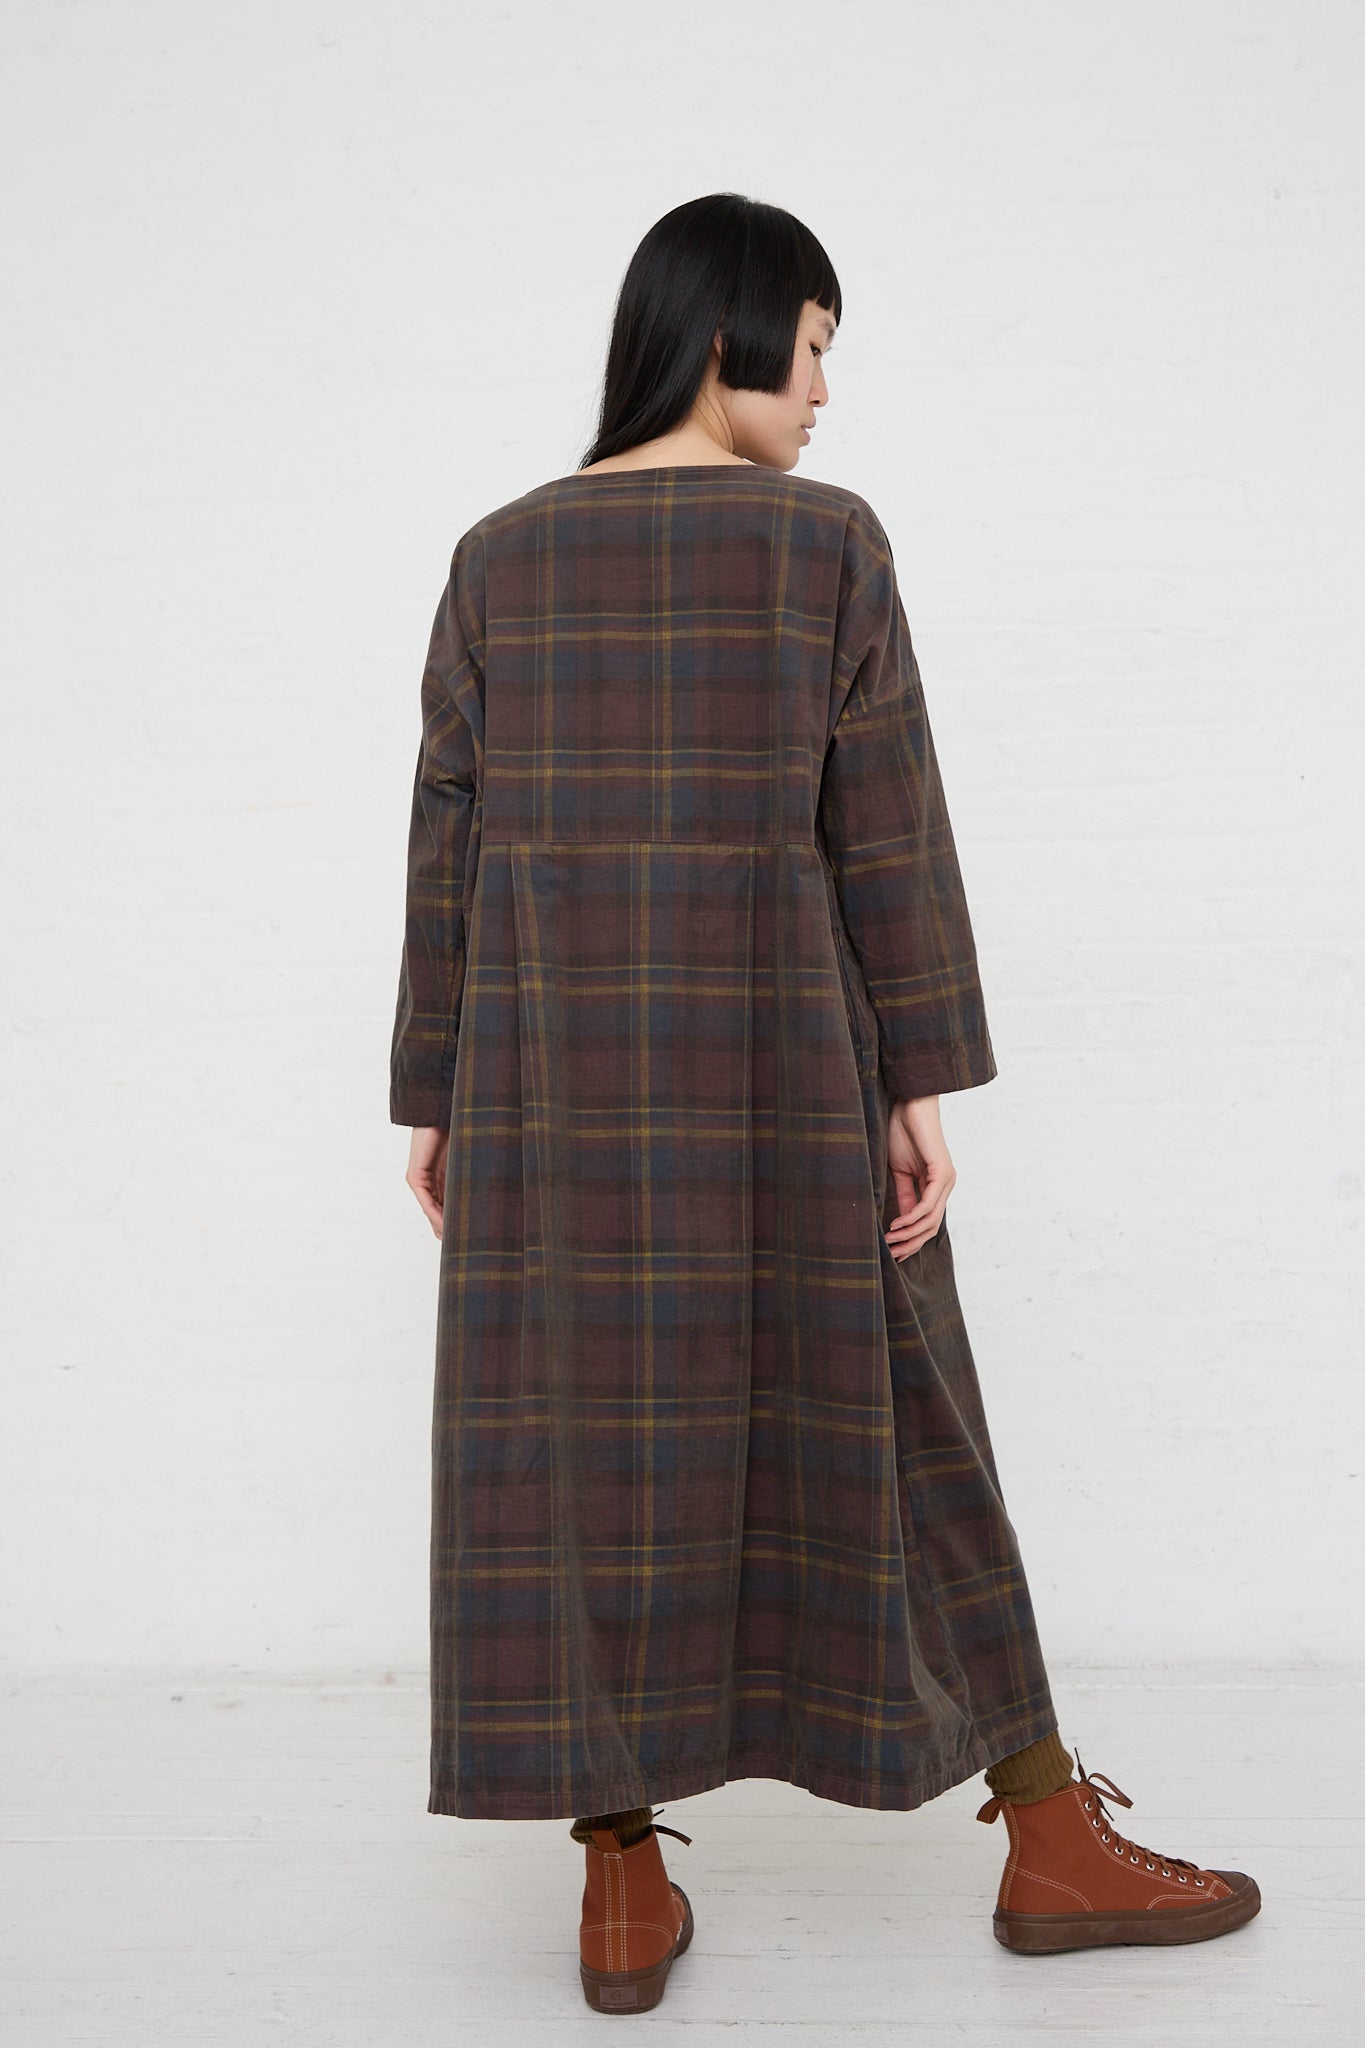 The back view of a woman wearing a relaxed fit Ichi woven cotton dress in brown plaid.